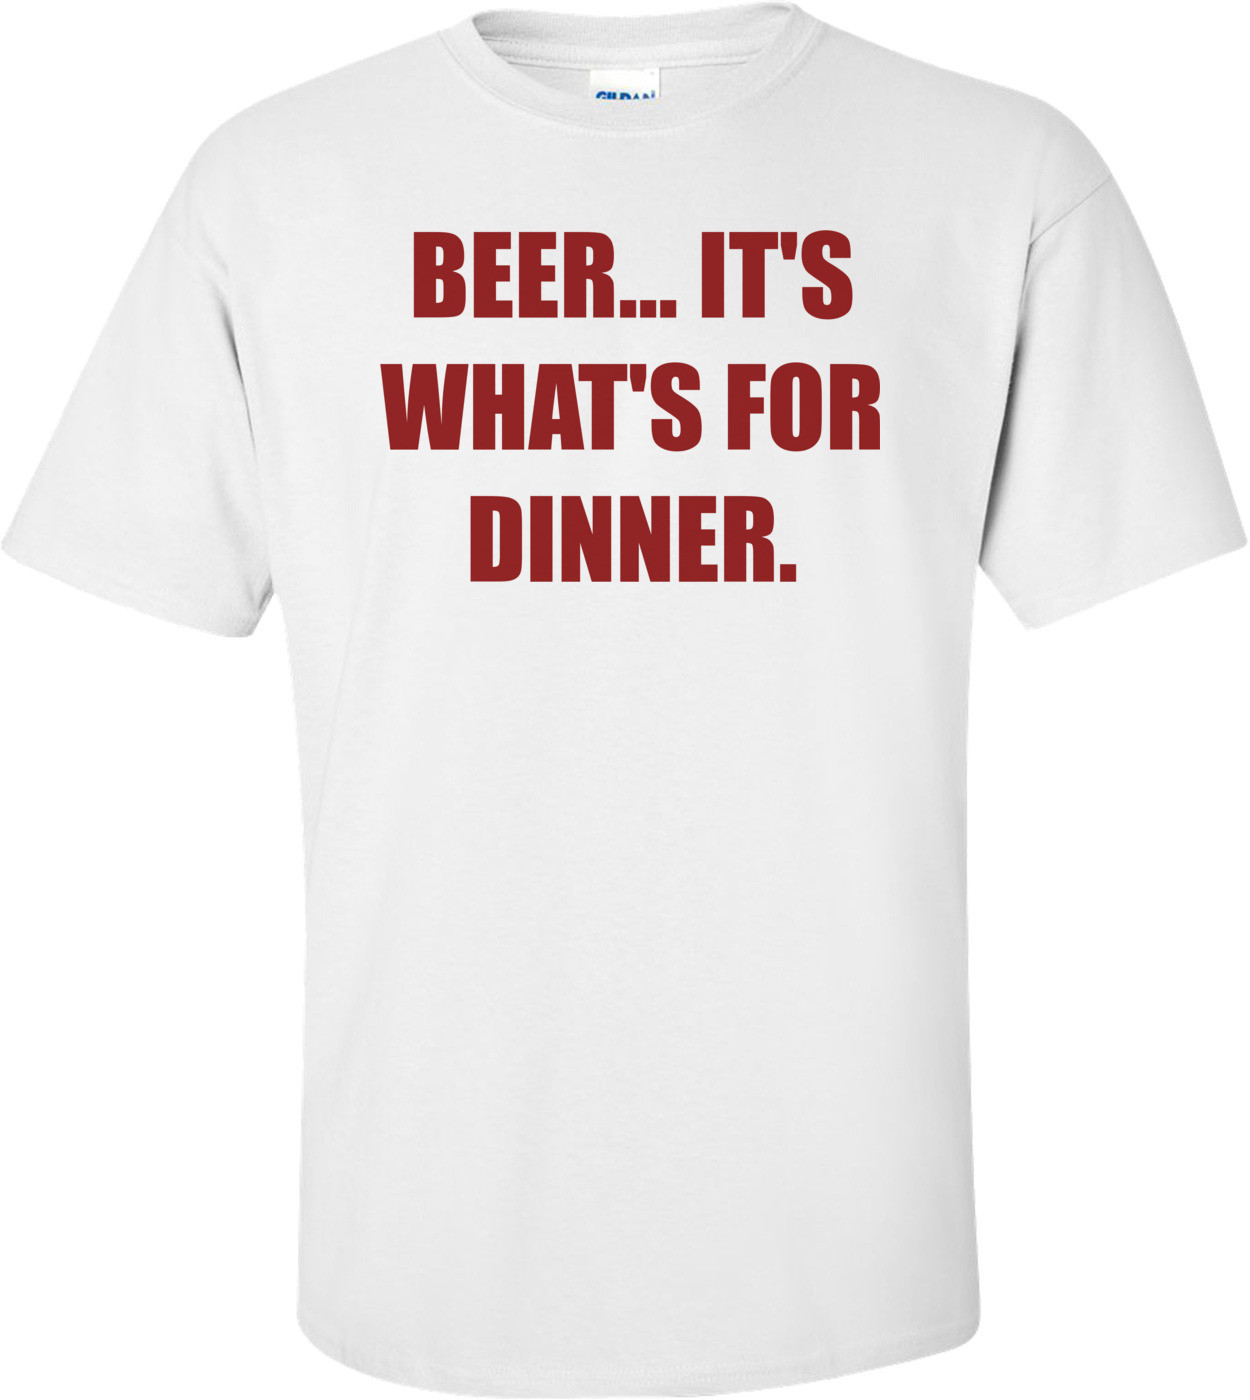 BEER... IT'S WHAT'S FOR DINNER.